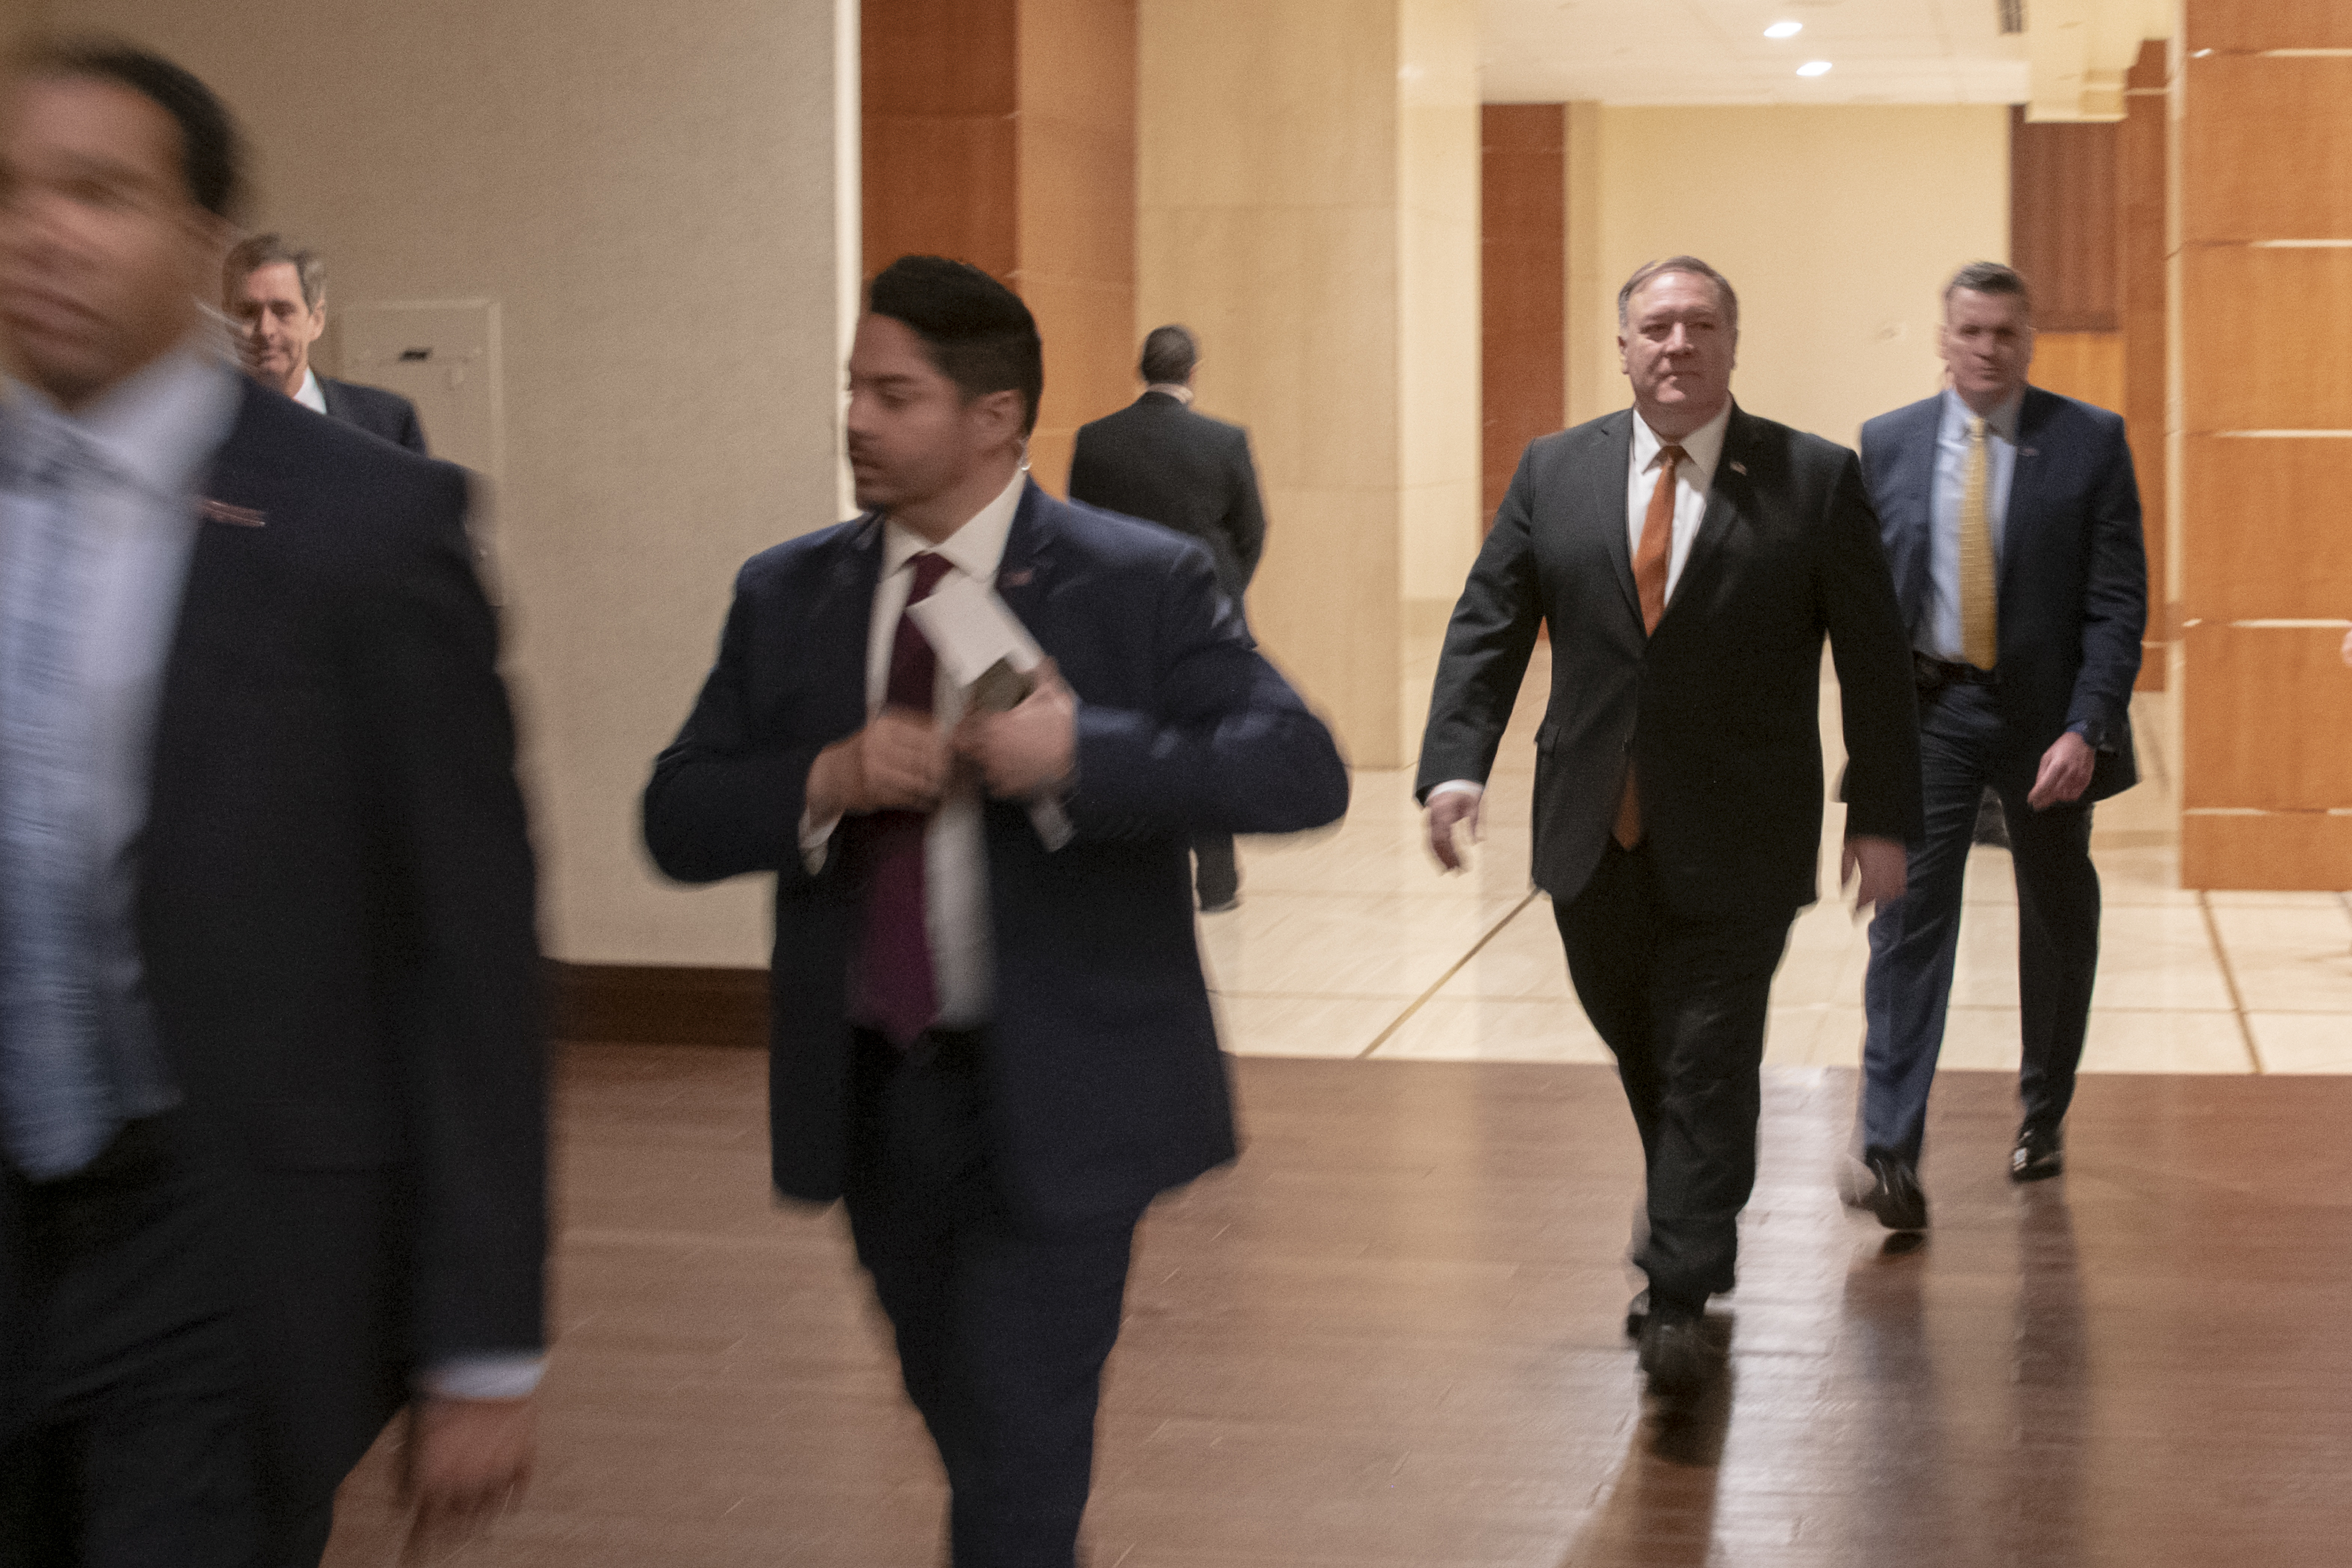 Pompeo joining an Iranian diaspora meeting in Dallas, April 15, 2019. (State Department/Ron Przysucha via Flickr)